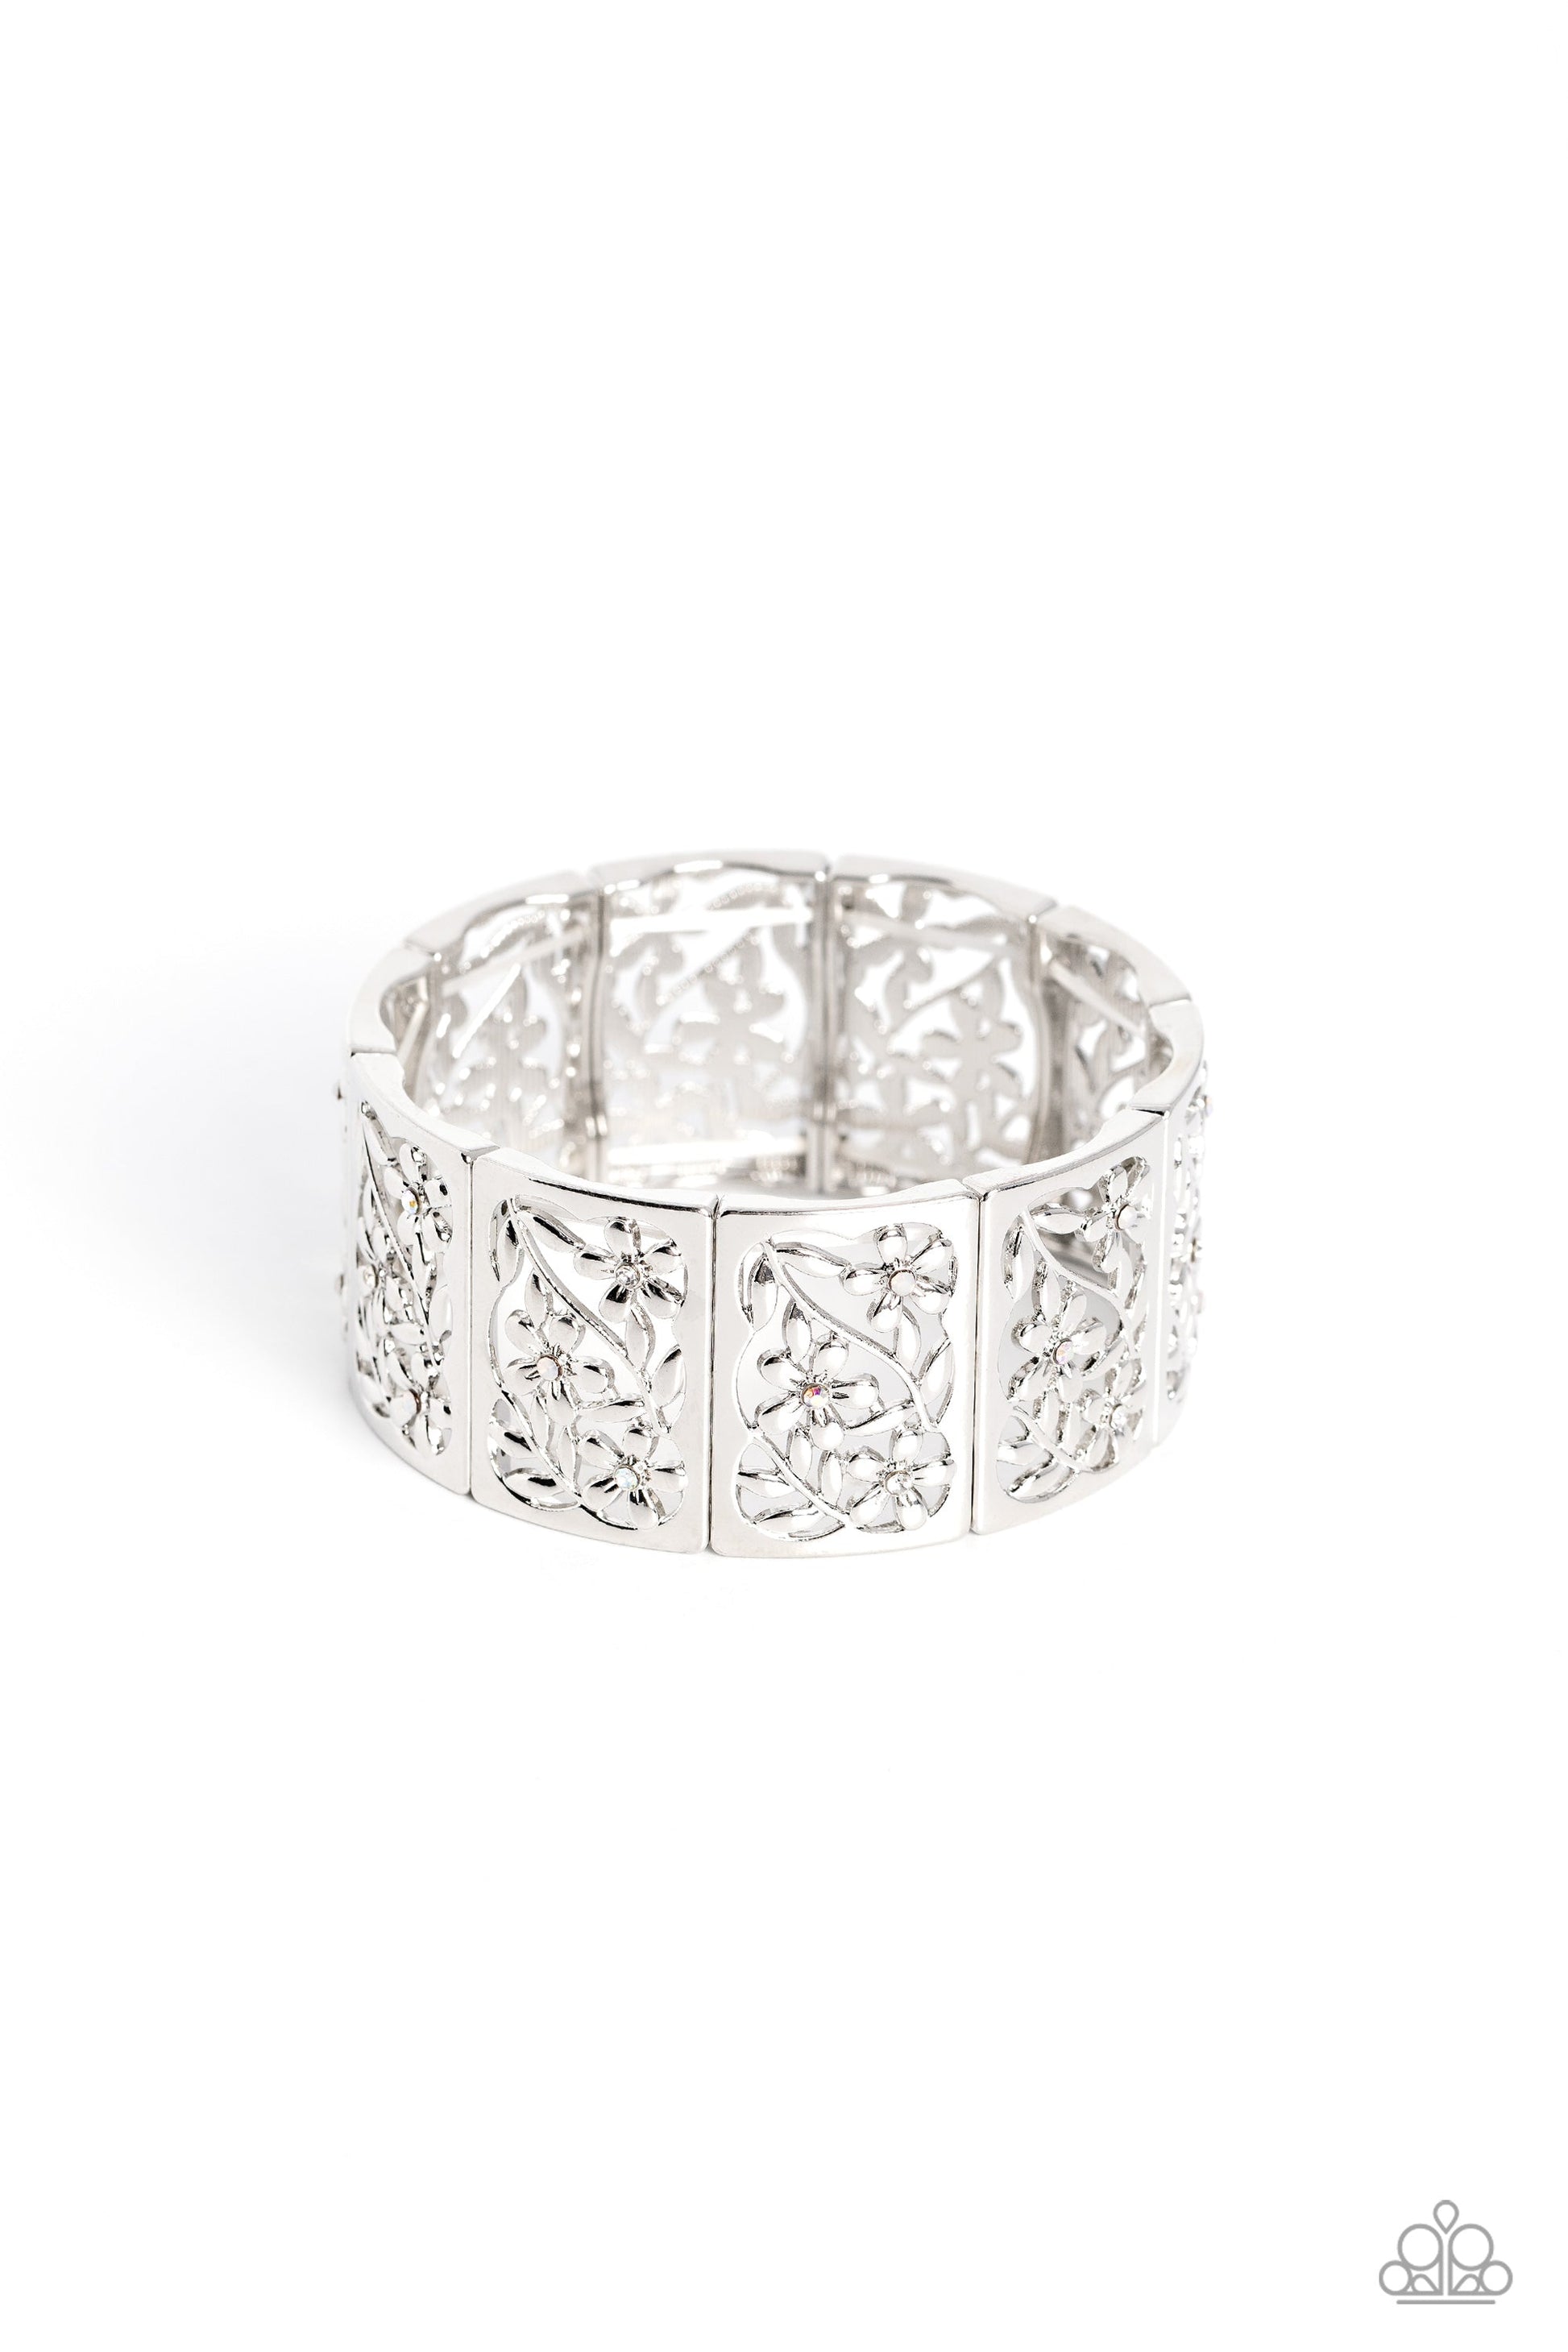 Garden Walls - White Iridescent and Silver Bracelet - Paparazzi Accessories - Sleek silver frames, filled with whimsical leafy floral filigree and opalescent, white, and iridescent rhinestones, stack around the wrist on an elastic stretchy band for a dainty handcrafted statement.